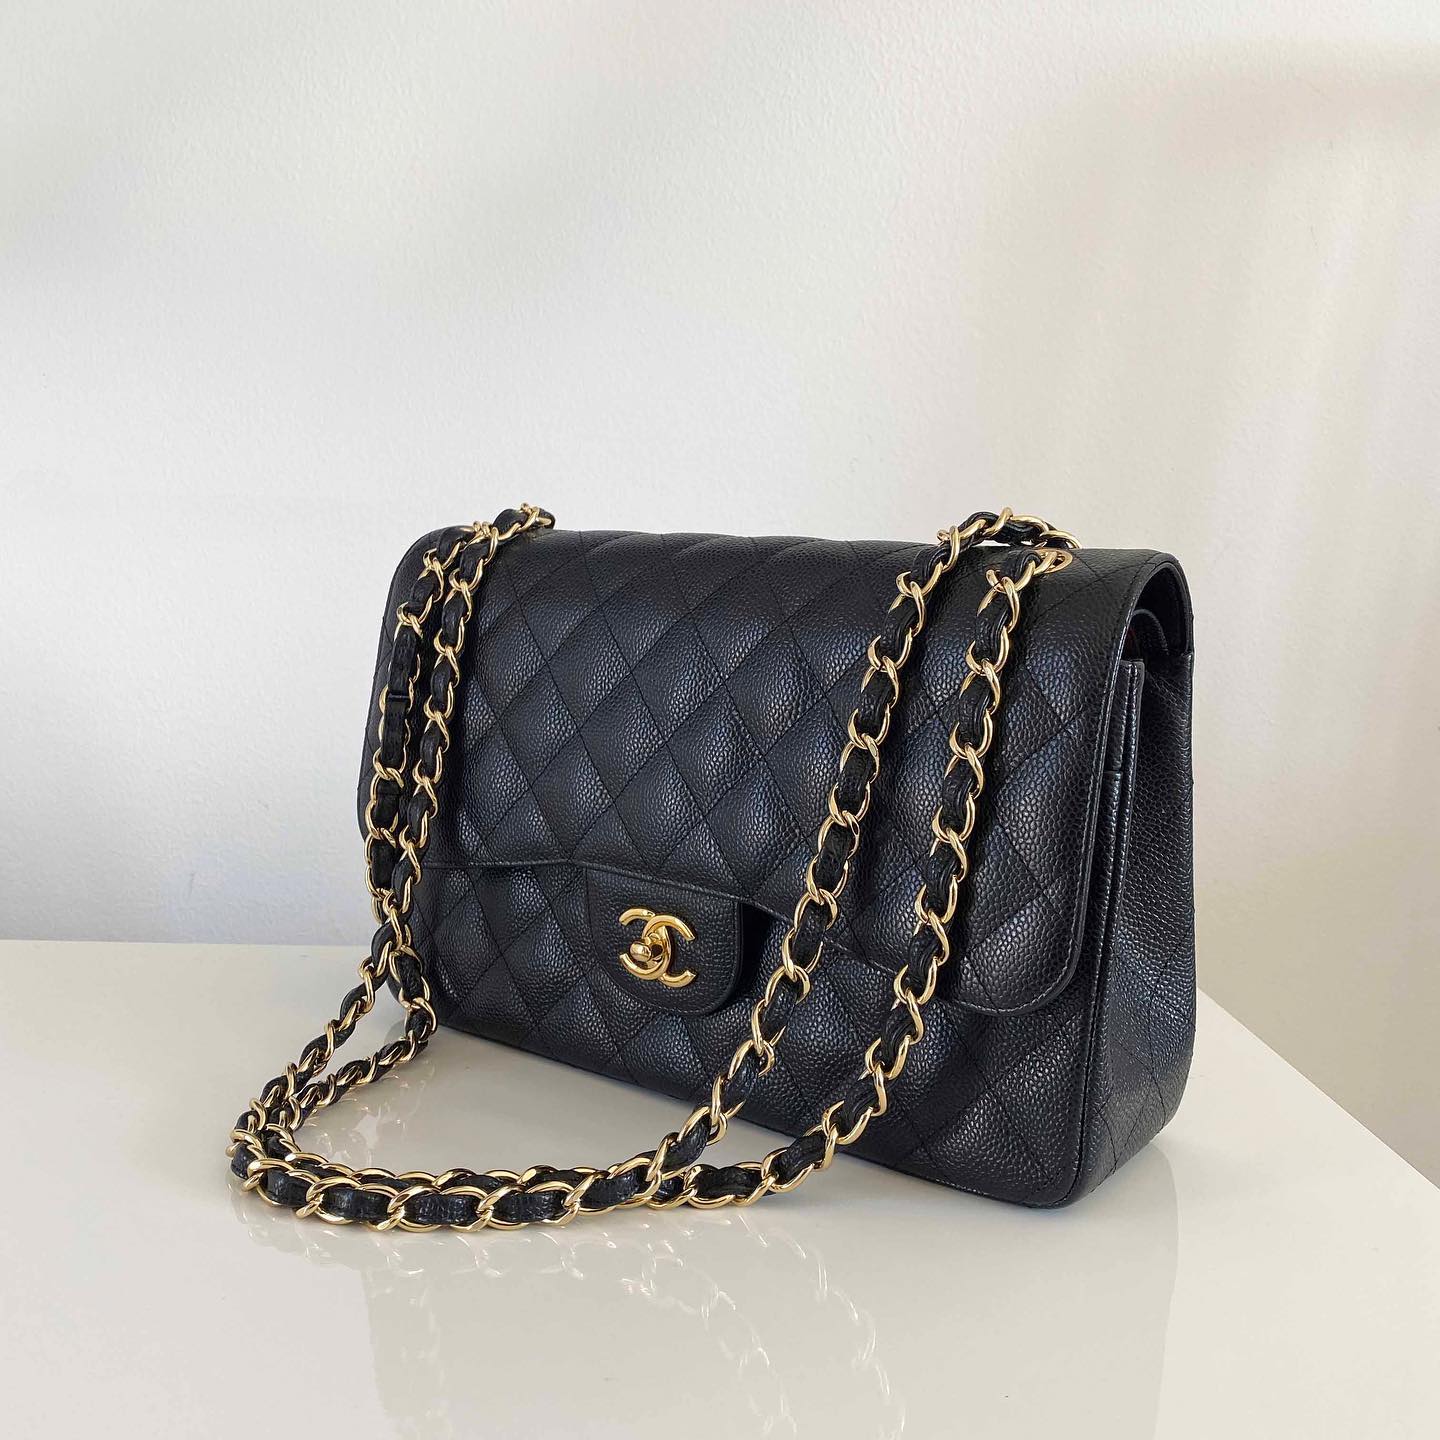 Chanel Resale: The Best Chanel Bags to Buy Right Now - BOPF